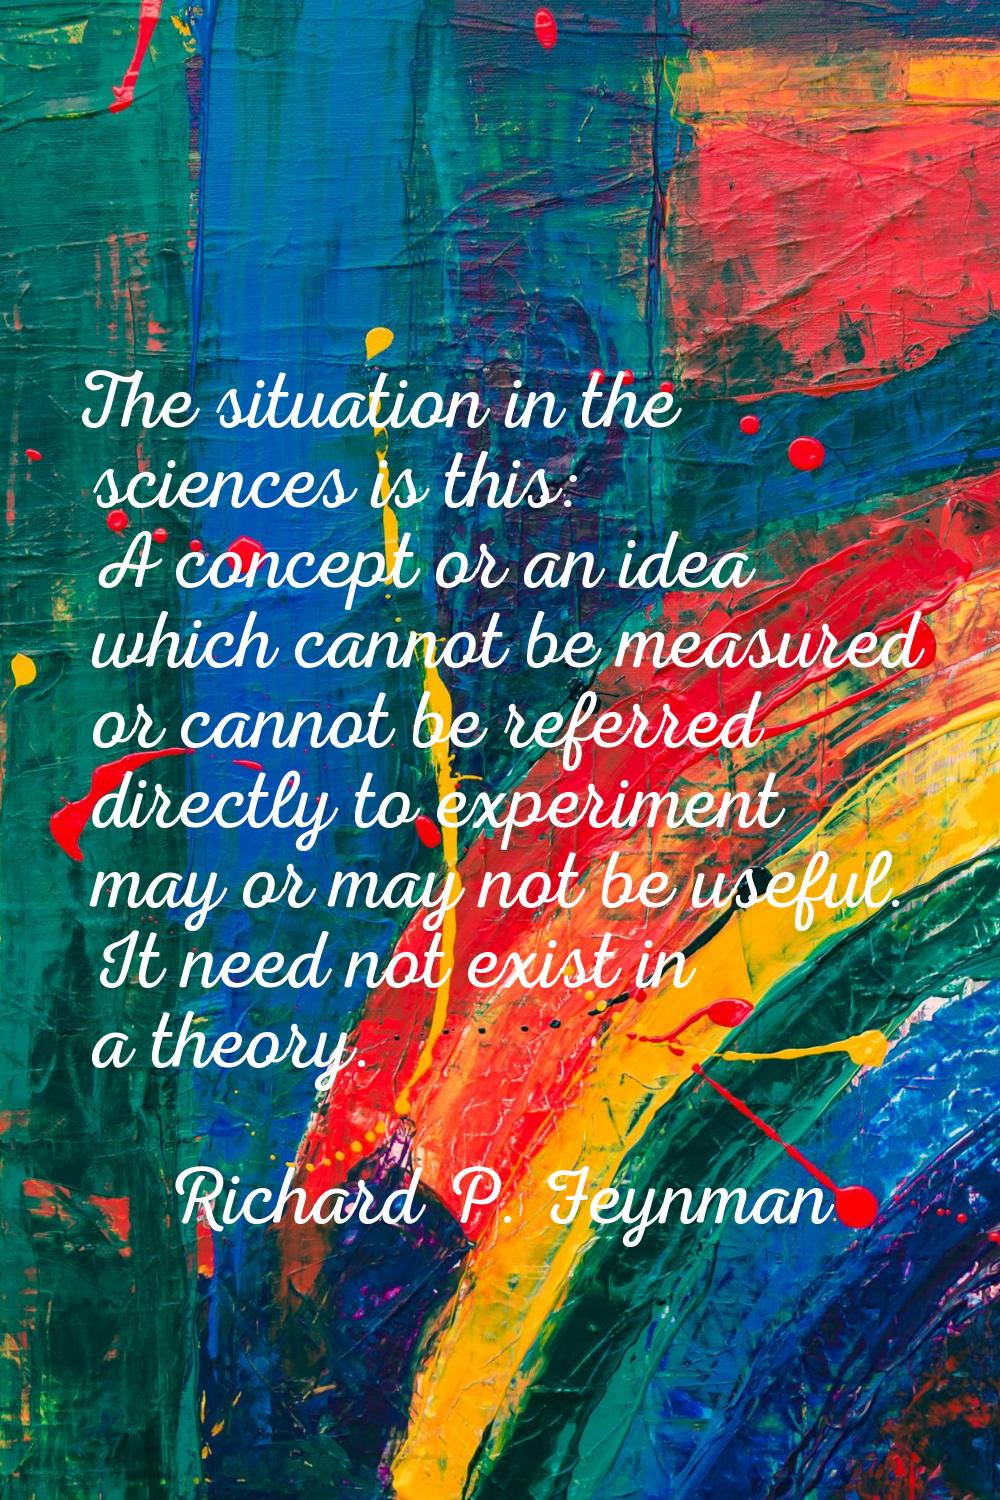 The situation in the sciences is this: A concept or an idea which cannot be measured or cannot be r